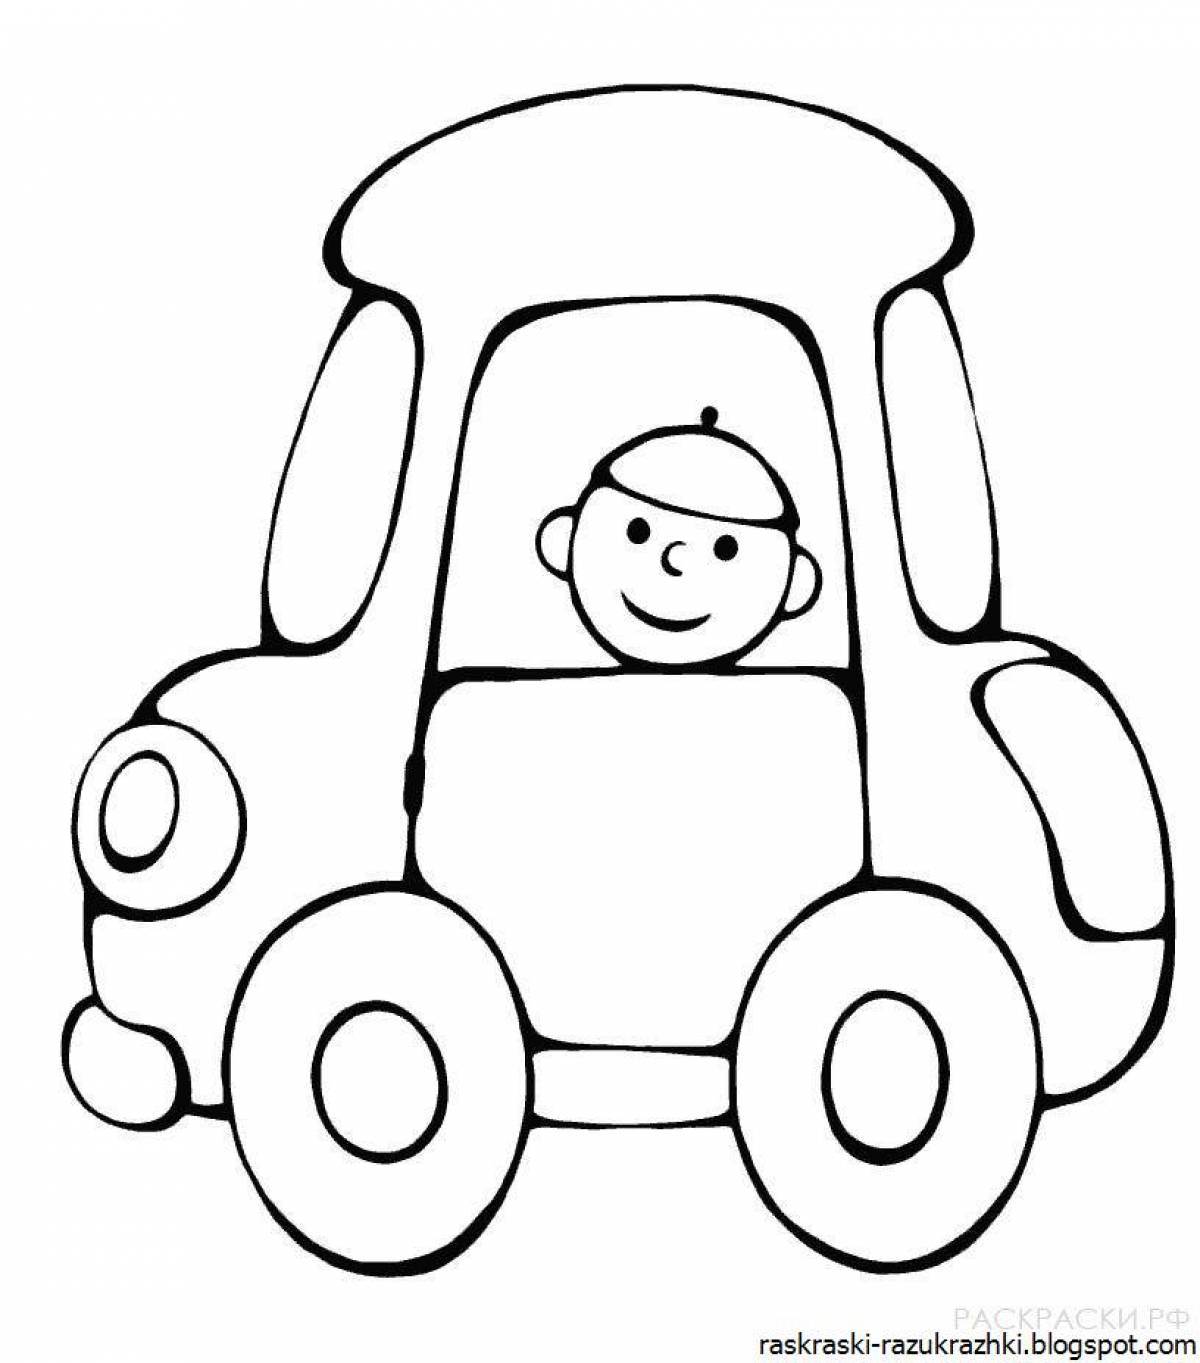 Coloring pages for children's cars colorful-fantasy